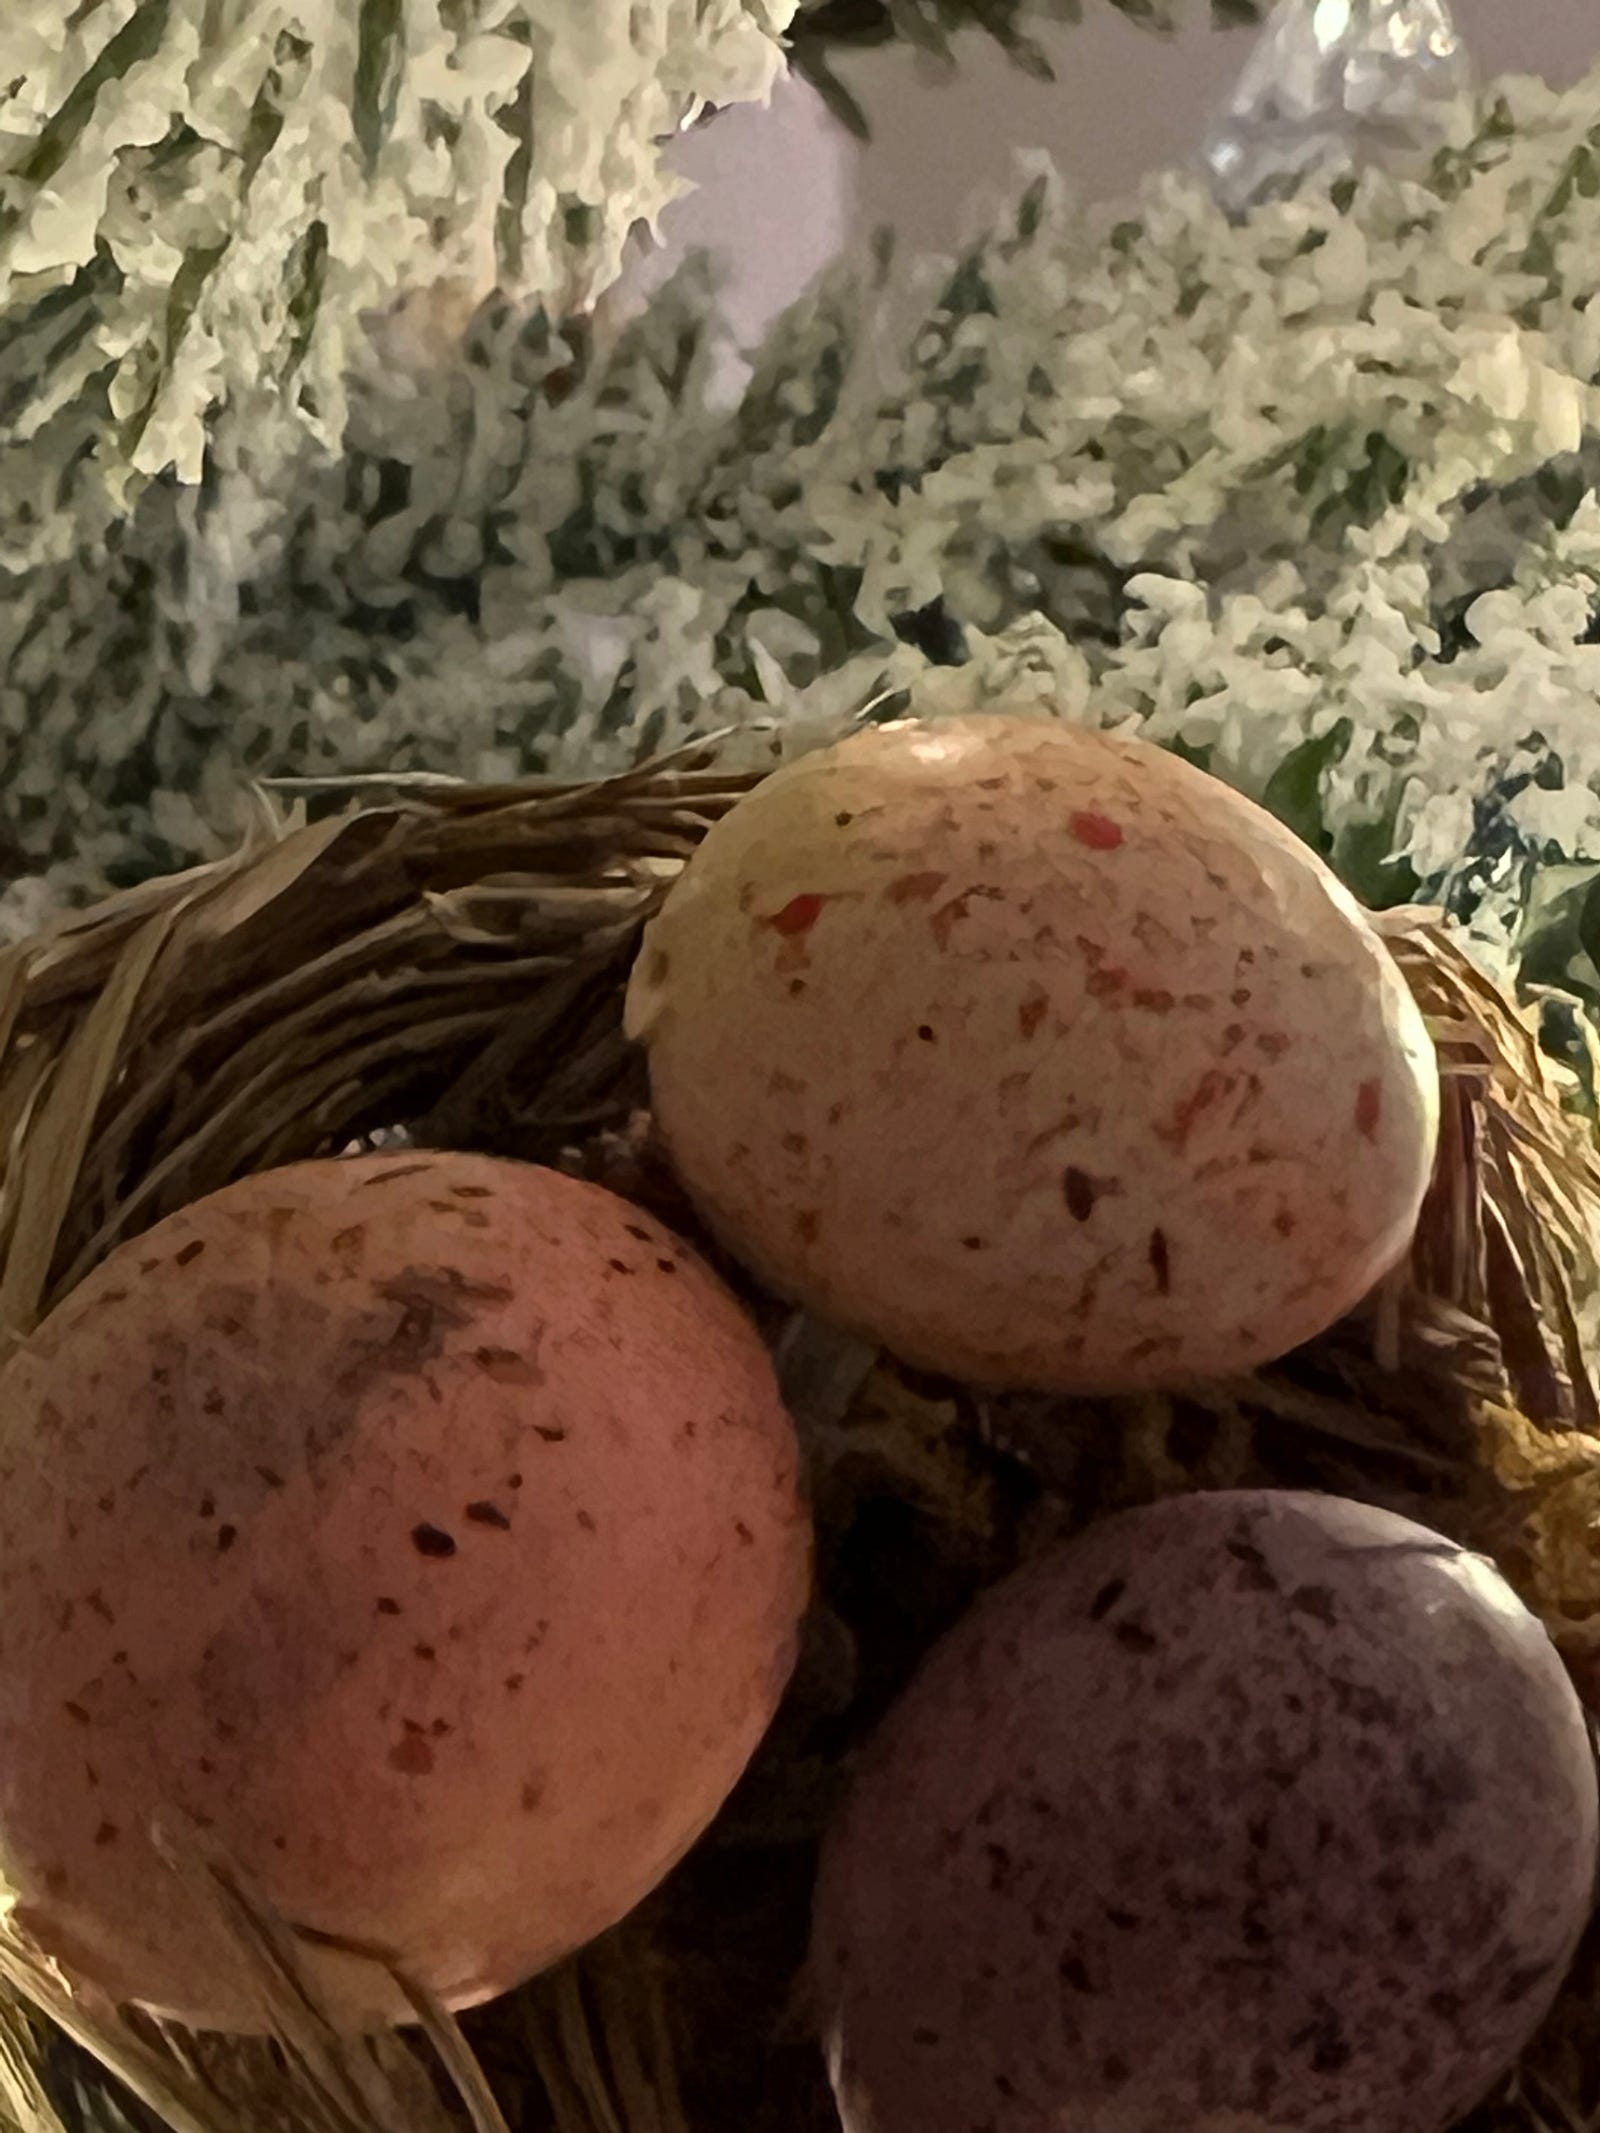 A birds nest of three eggs on the branch of a Christmas tree